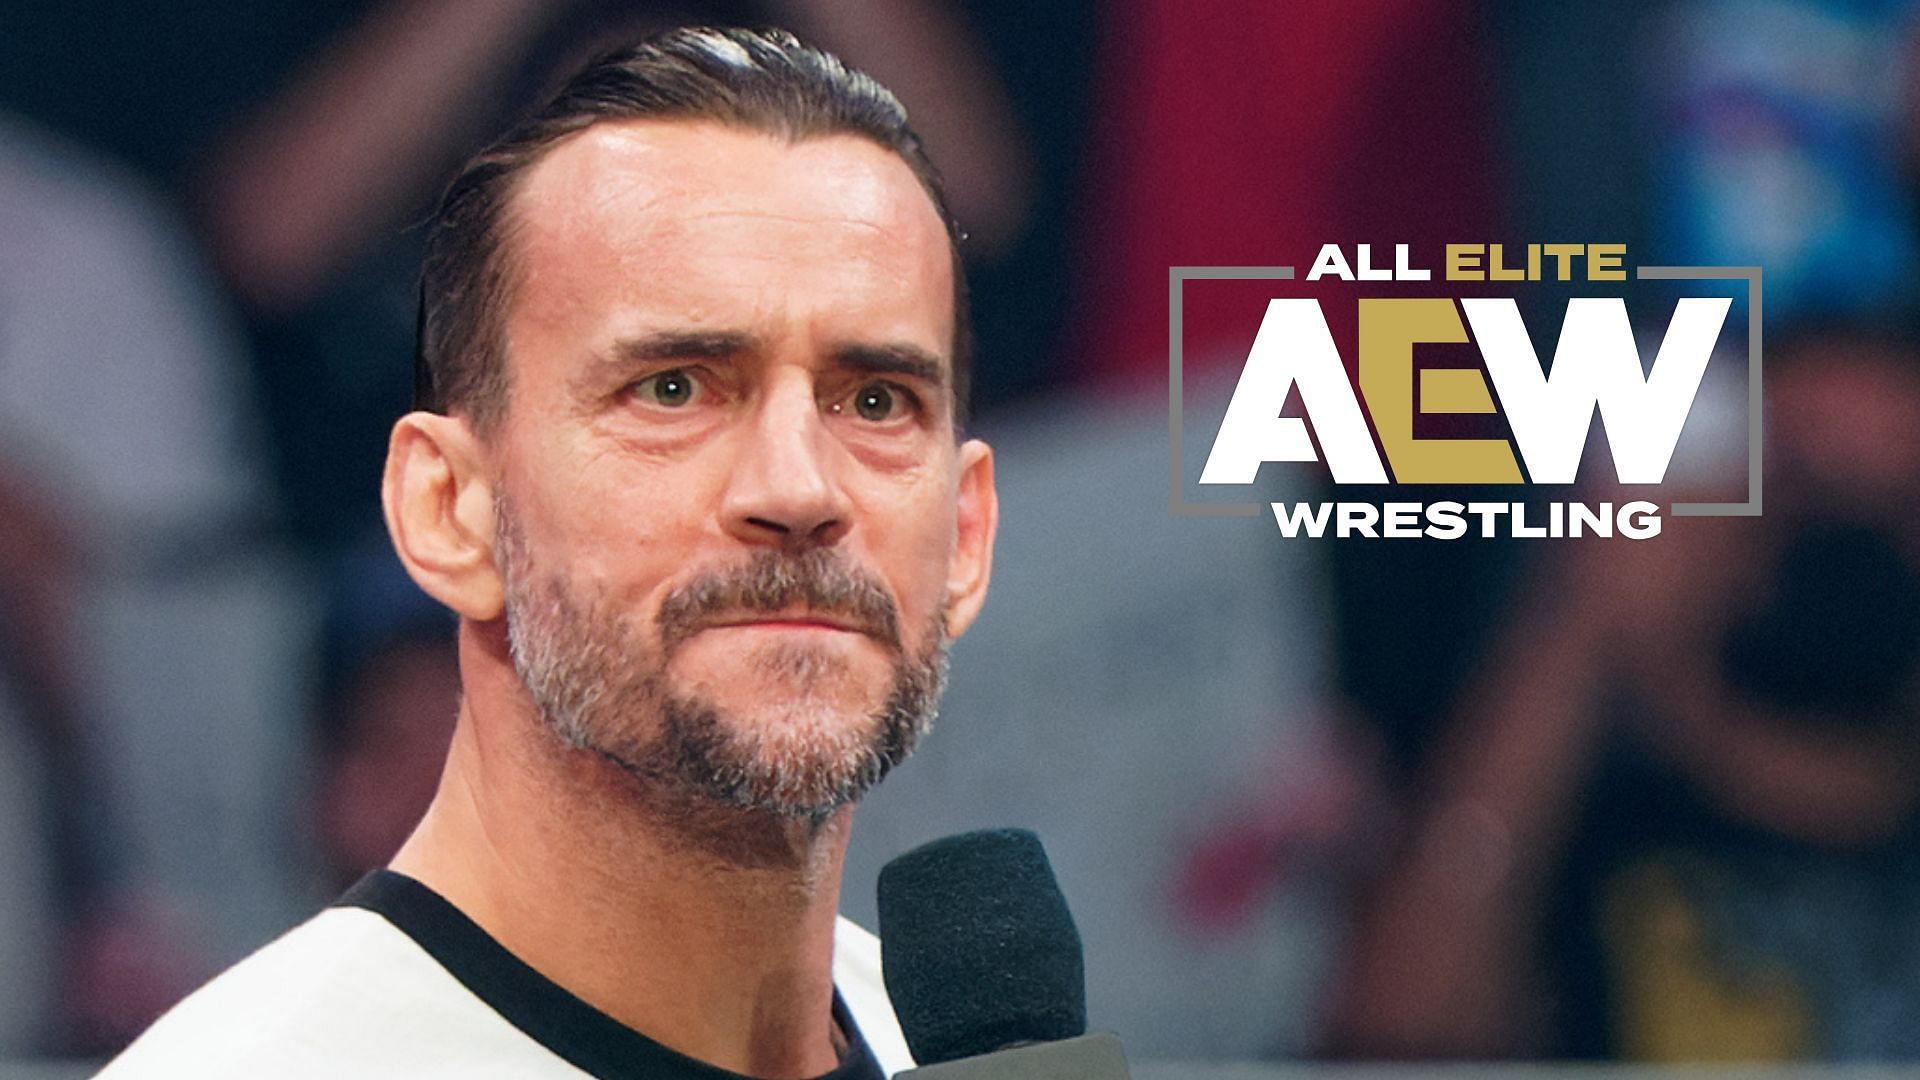 What condition does CM Punk have to meet in order to be backstage at this promotion?